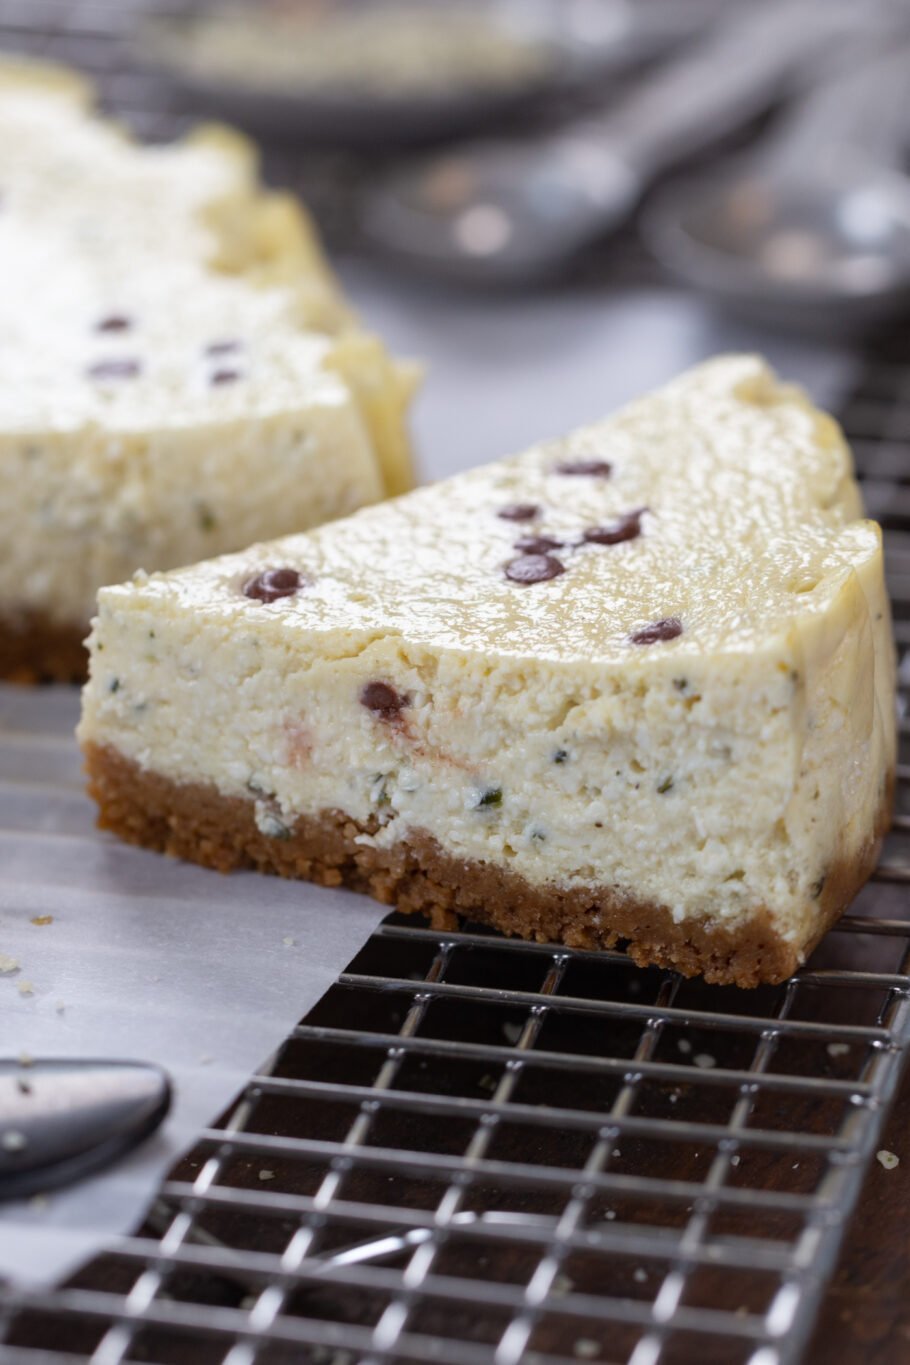 Healthy Cheesecake with Simple Ingredients Recipe